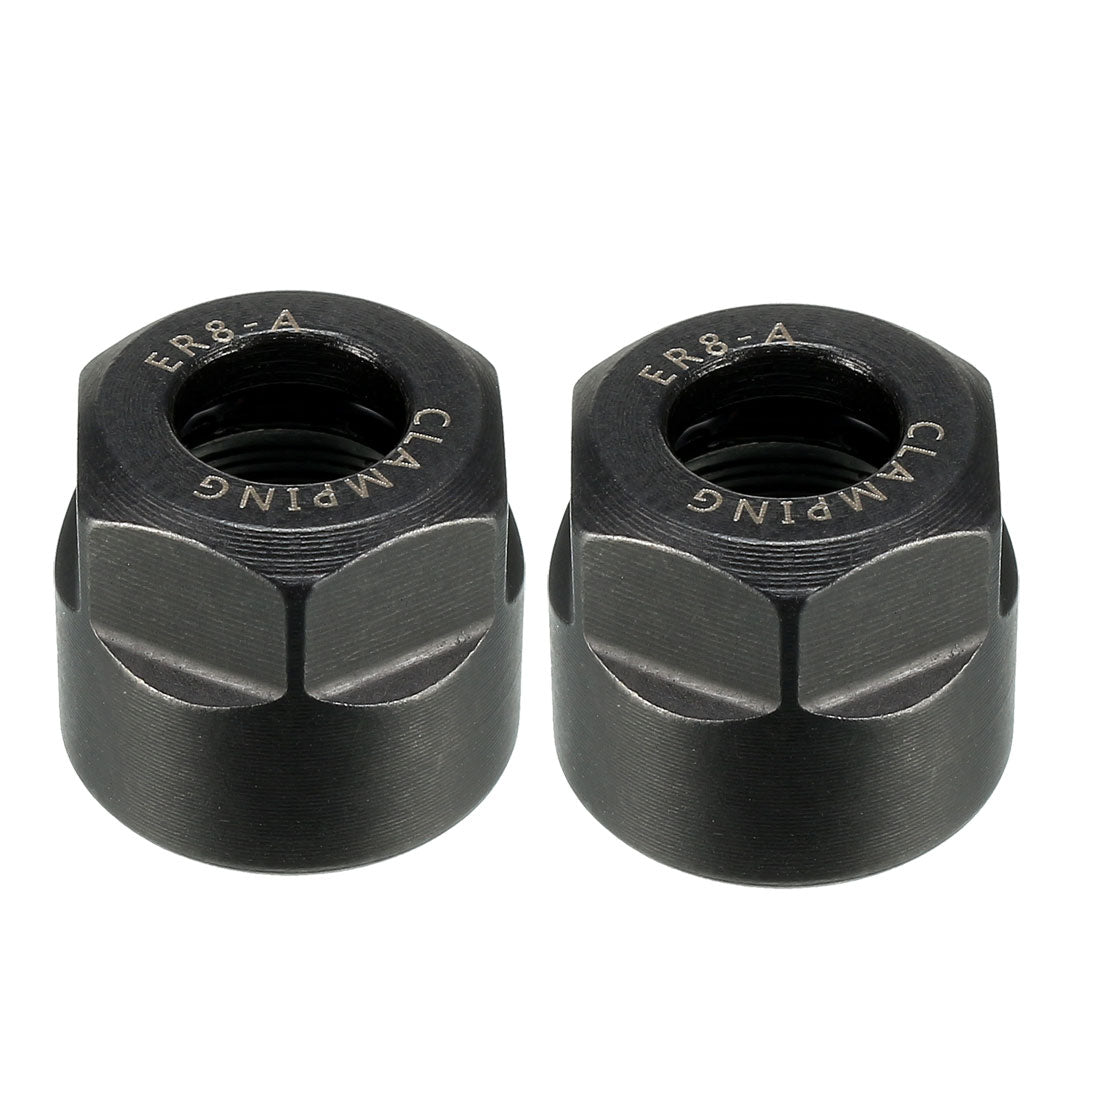 uxcell Uxcell ER8 A Type Collet Clamping Hex Nuts for CNC Milling Chuck Holder Lathe 2 Pcs